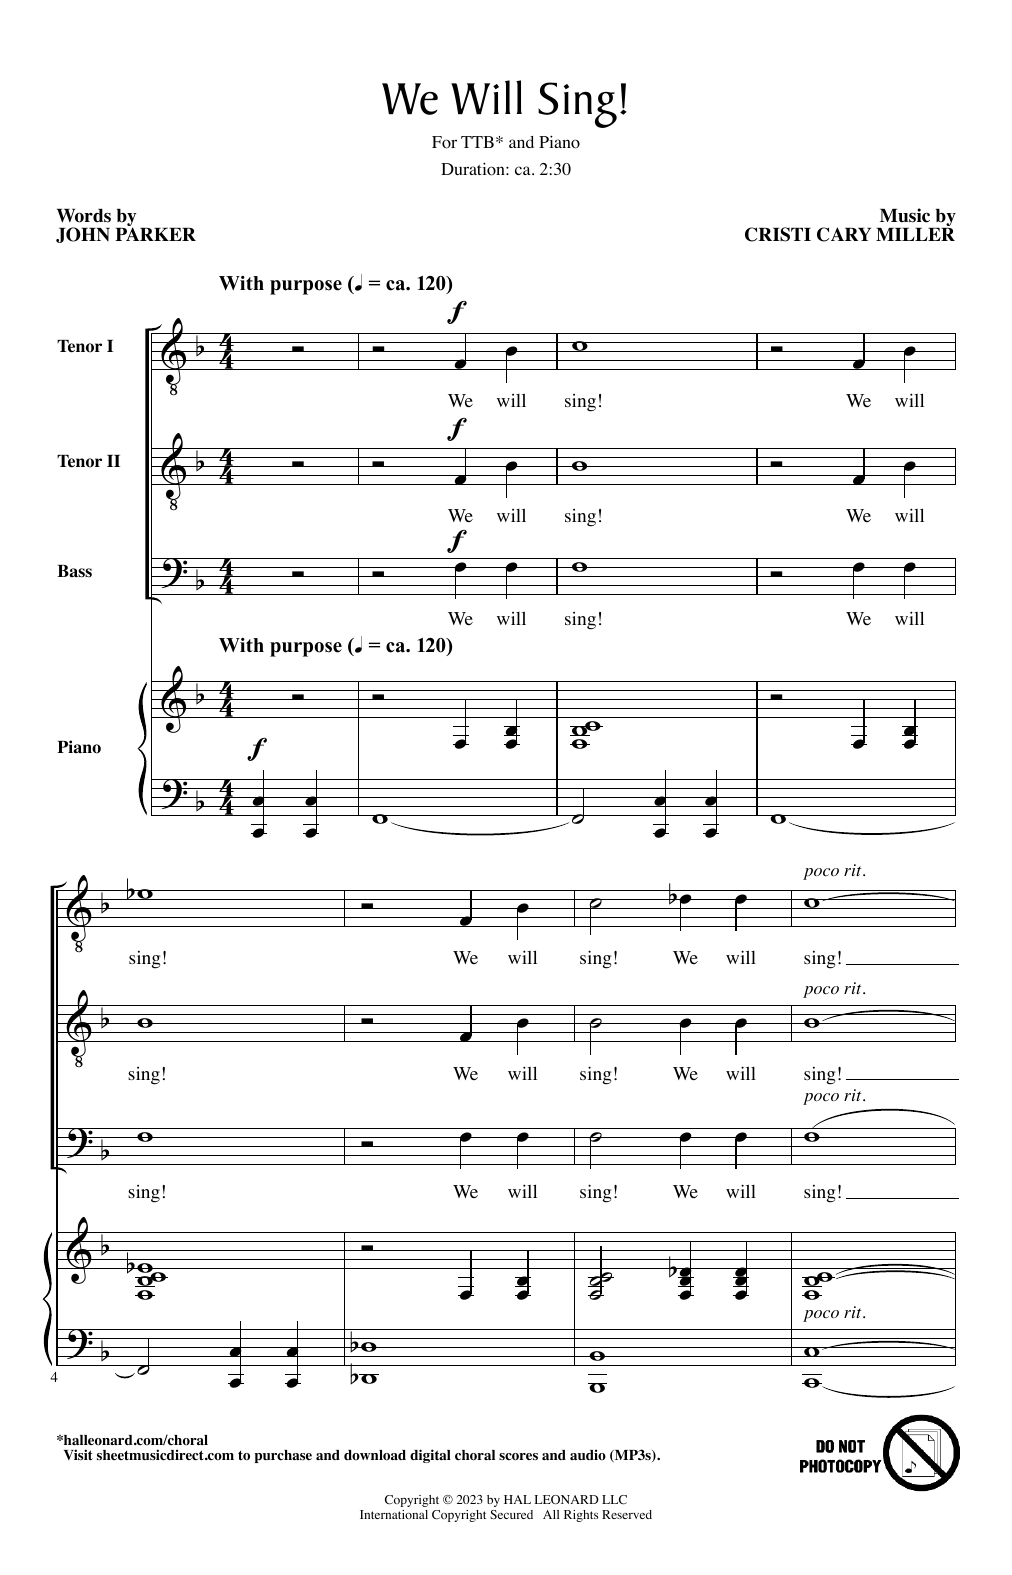 Download Cristi Cary Miller We Will Sing! Sheet Music